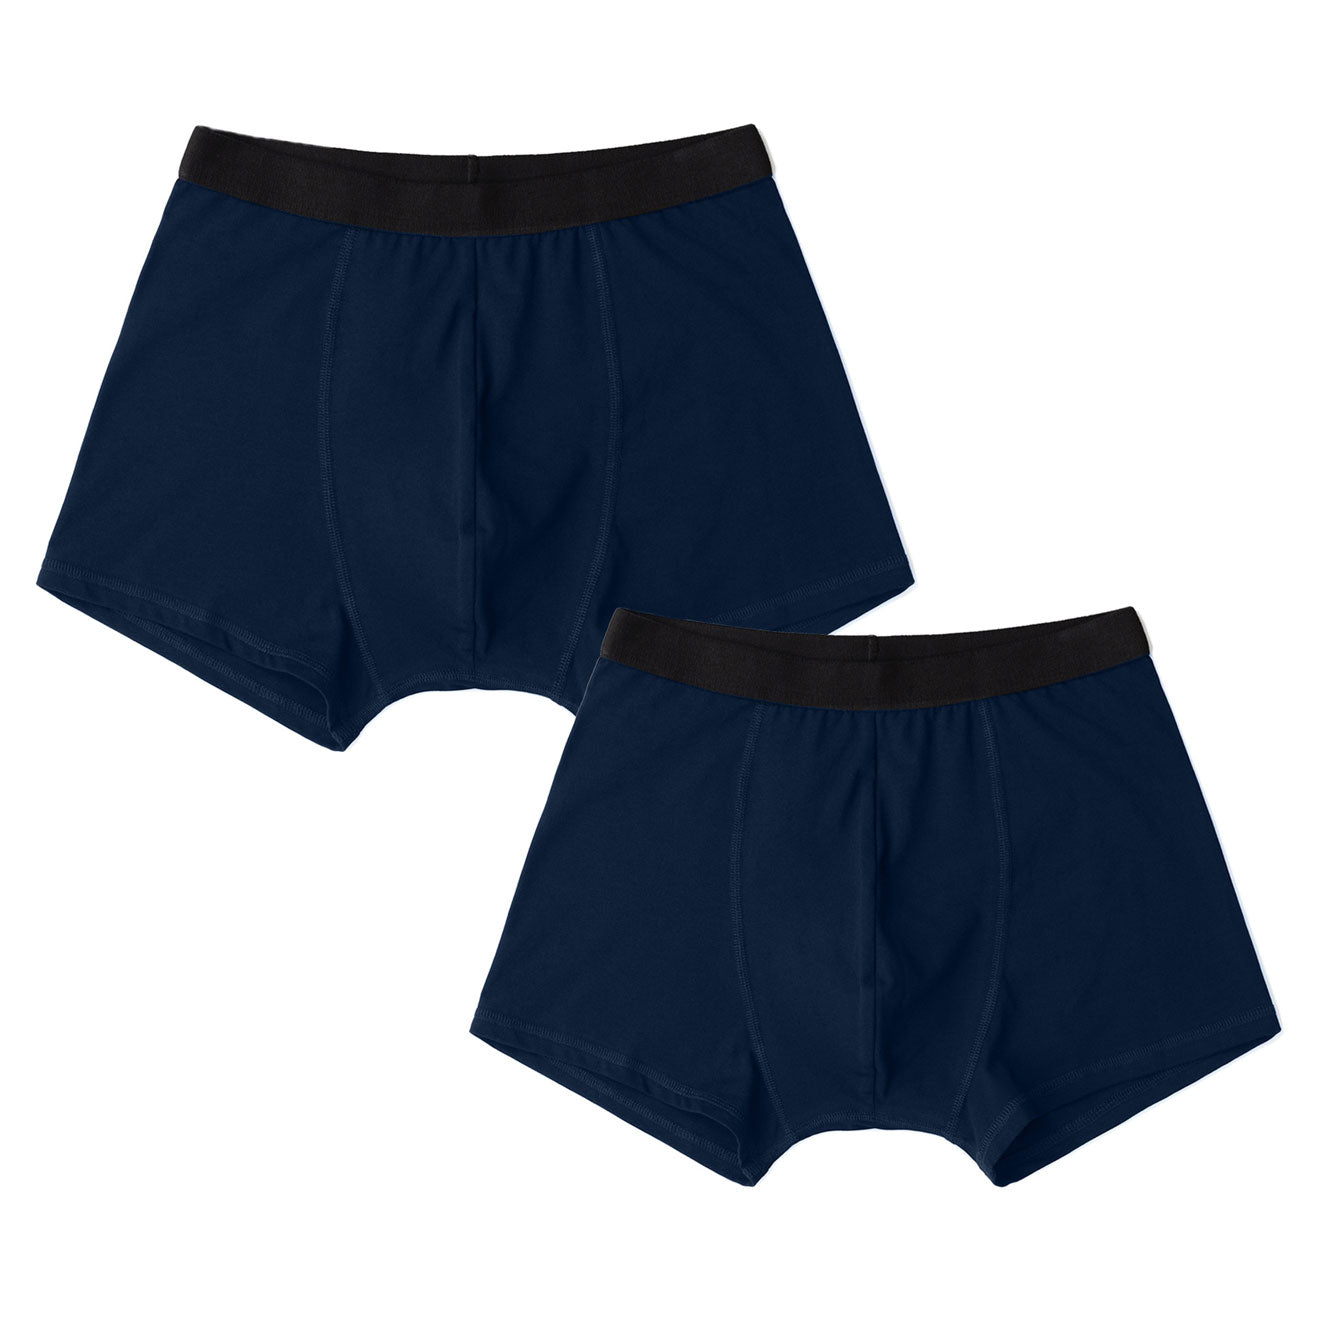 2 Pack of Boys Navy Blue Boxers | Draws For A Cause